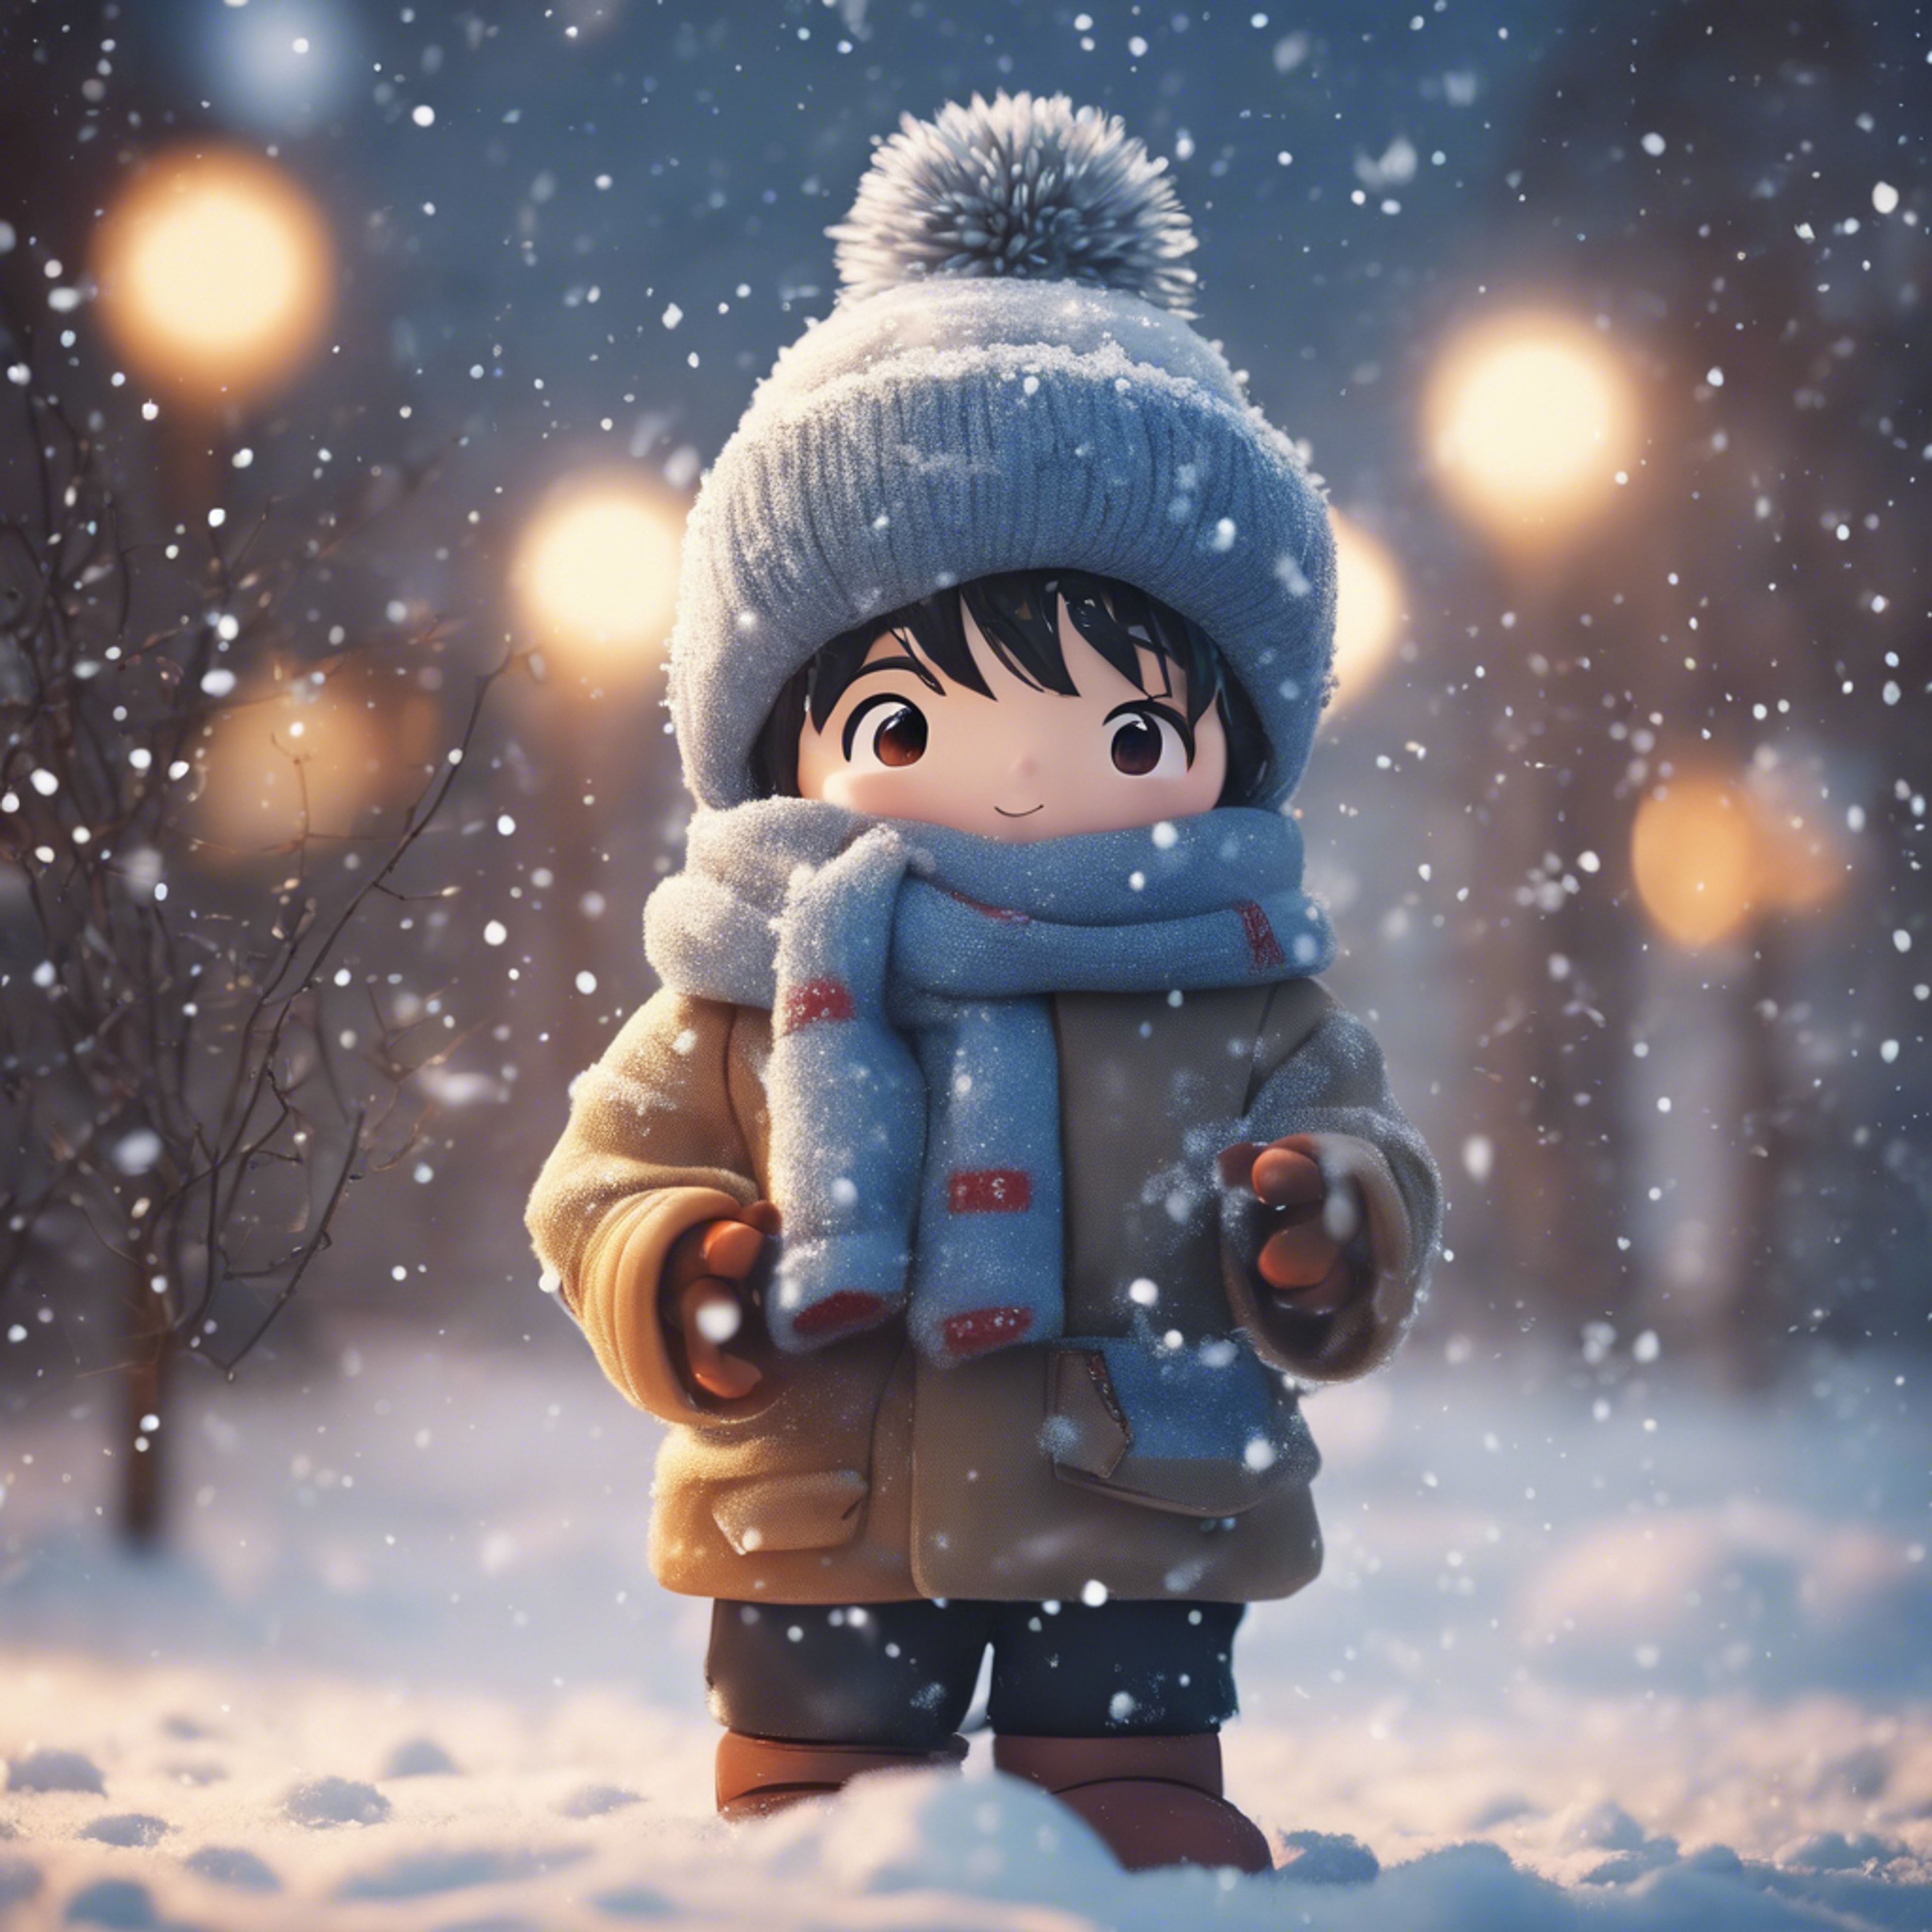 Anime boy wrapped in warm winter clothes, building a playful snowman in the snowfall. Ταπετσαρία[d4075dc9b13644f685e7]